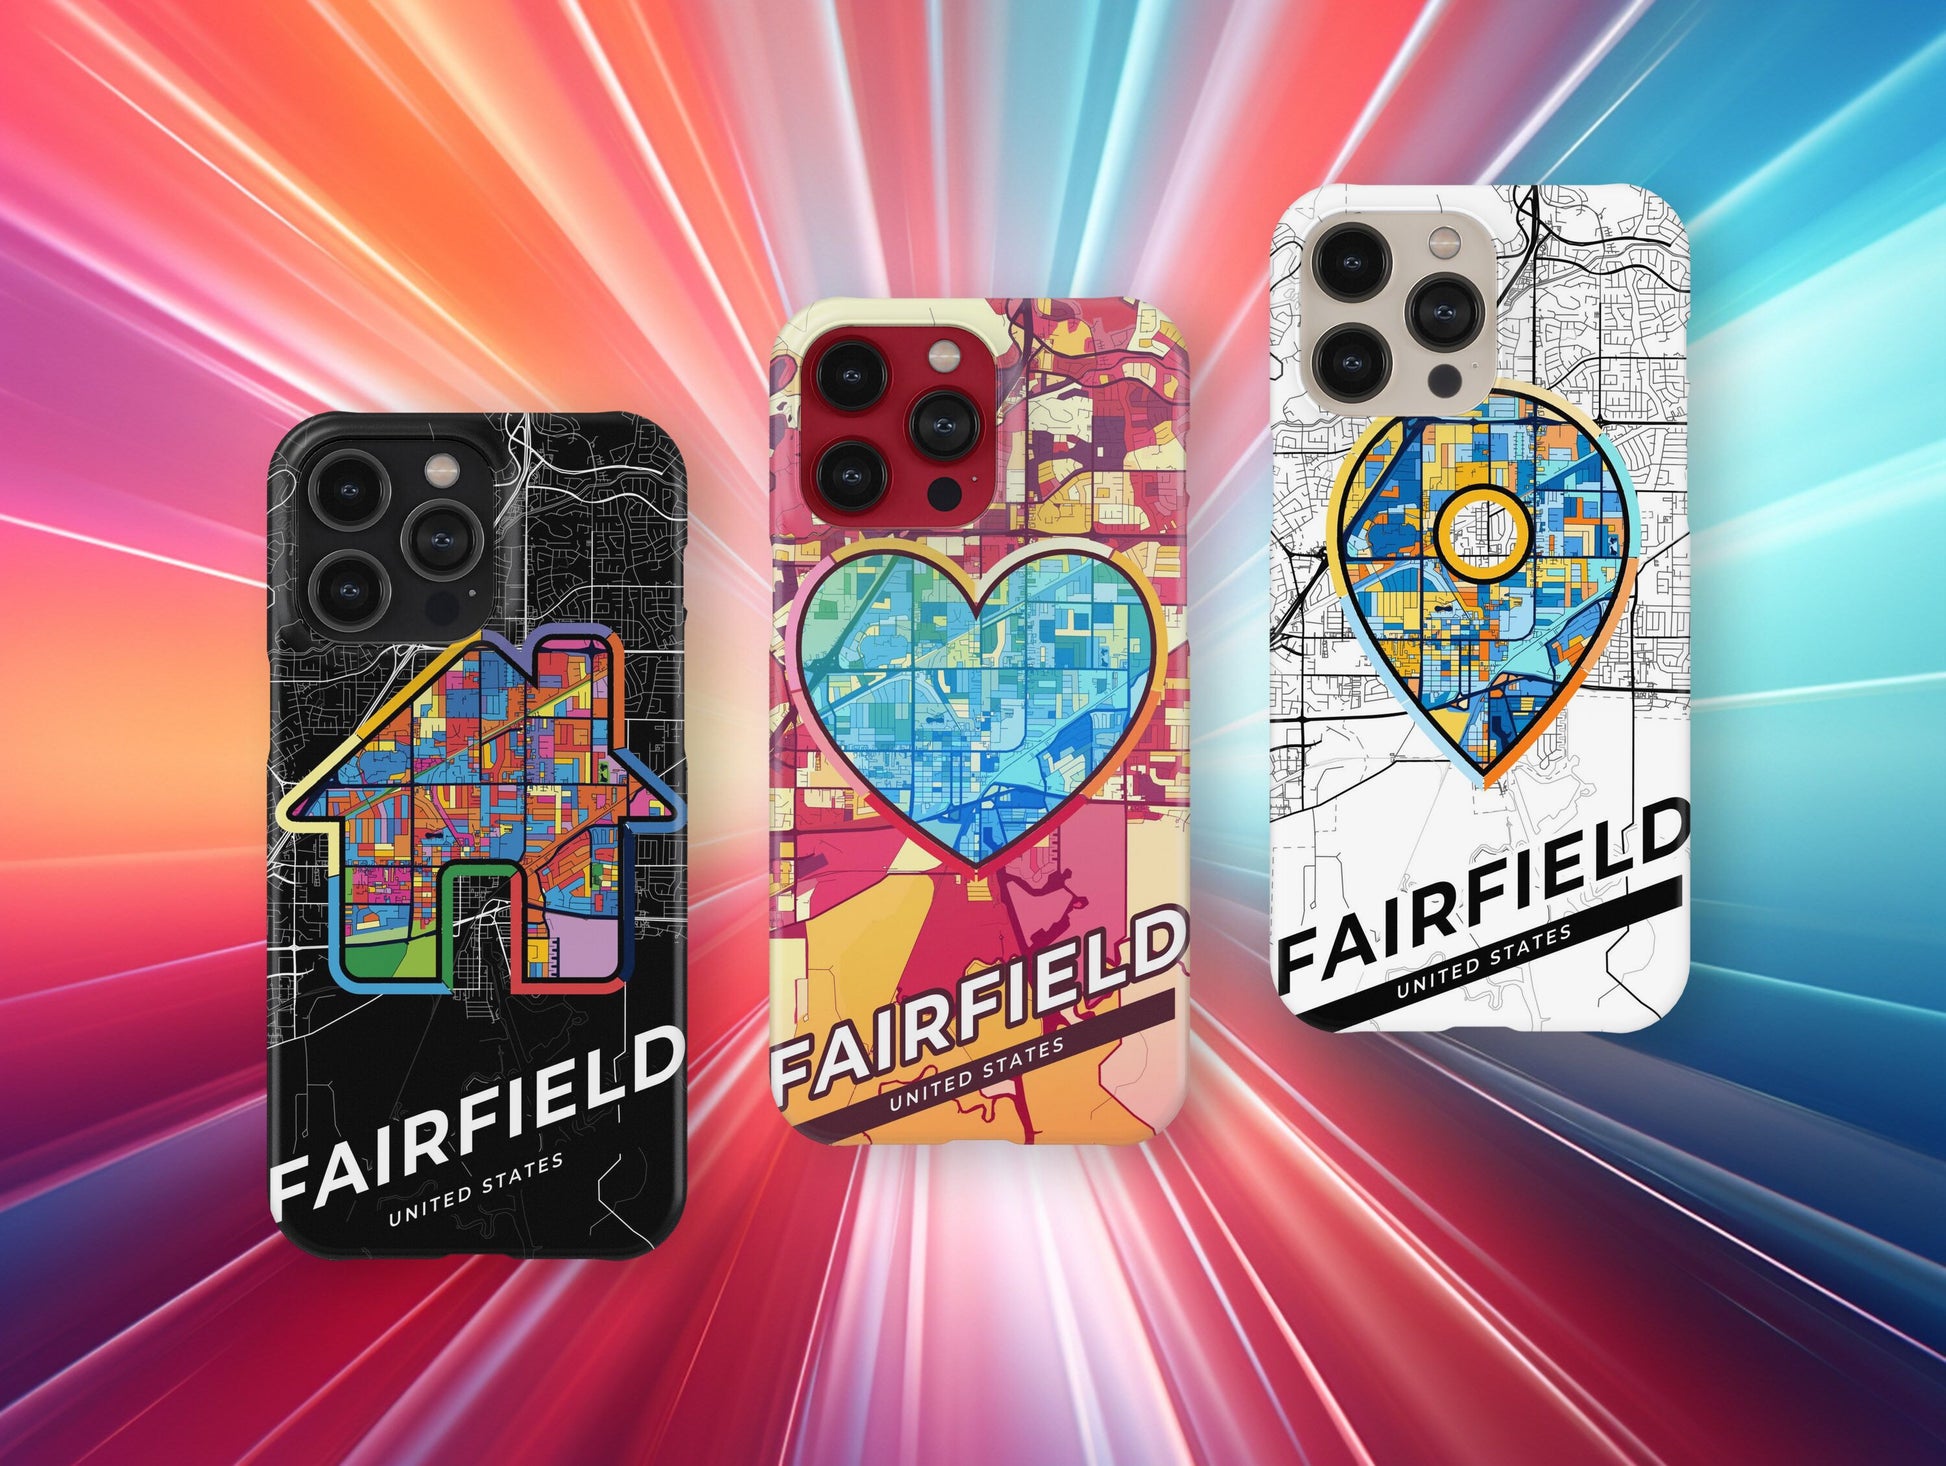 Fairfield California slim phone case with colorful icon. Birthday, wedding or housewarming gift. Couple match cases.